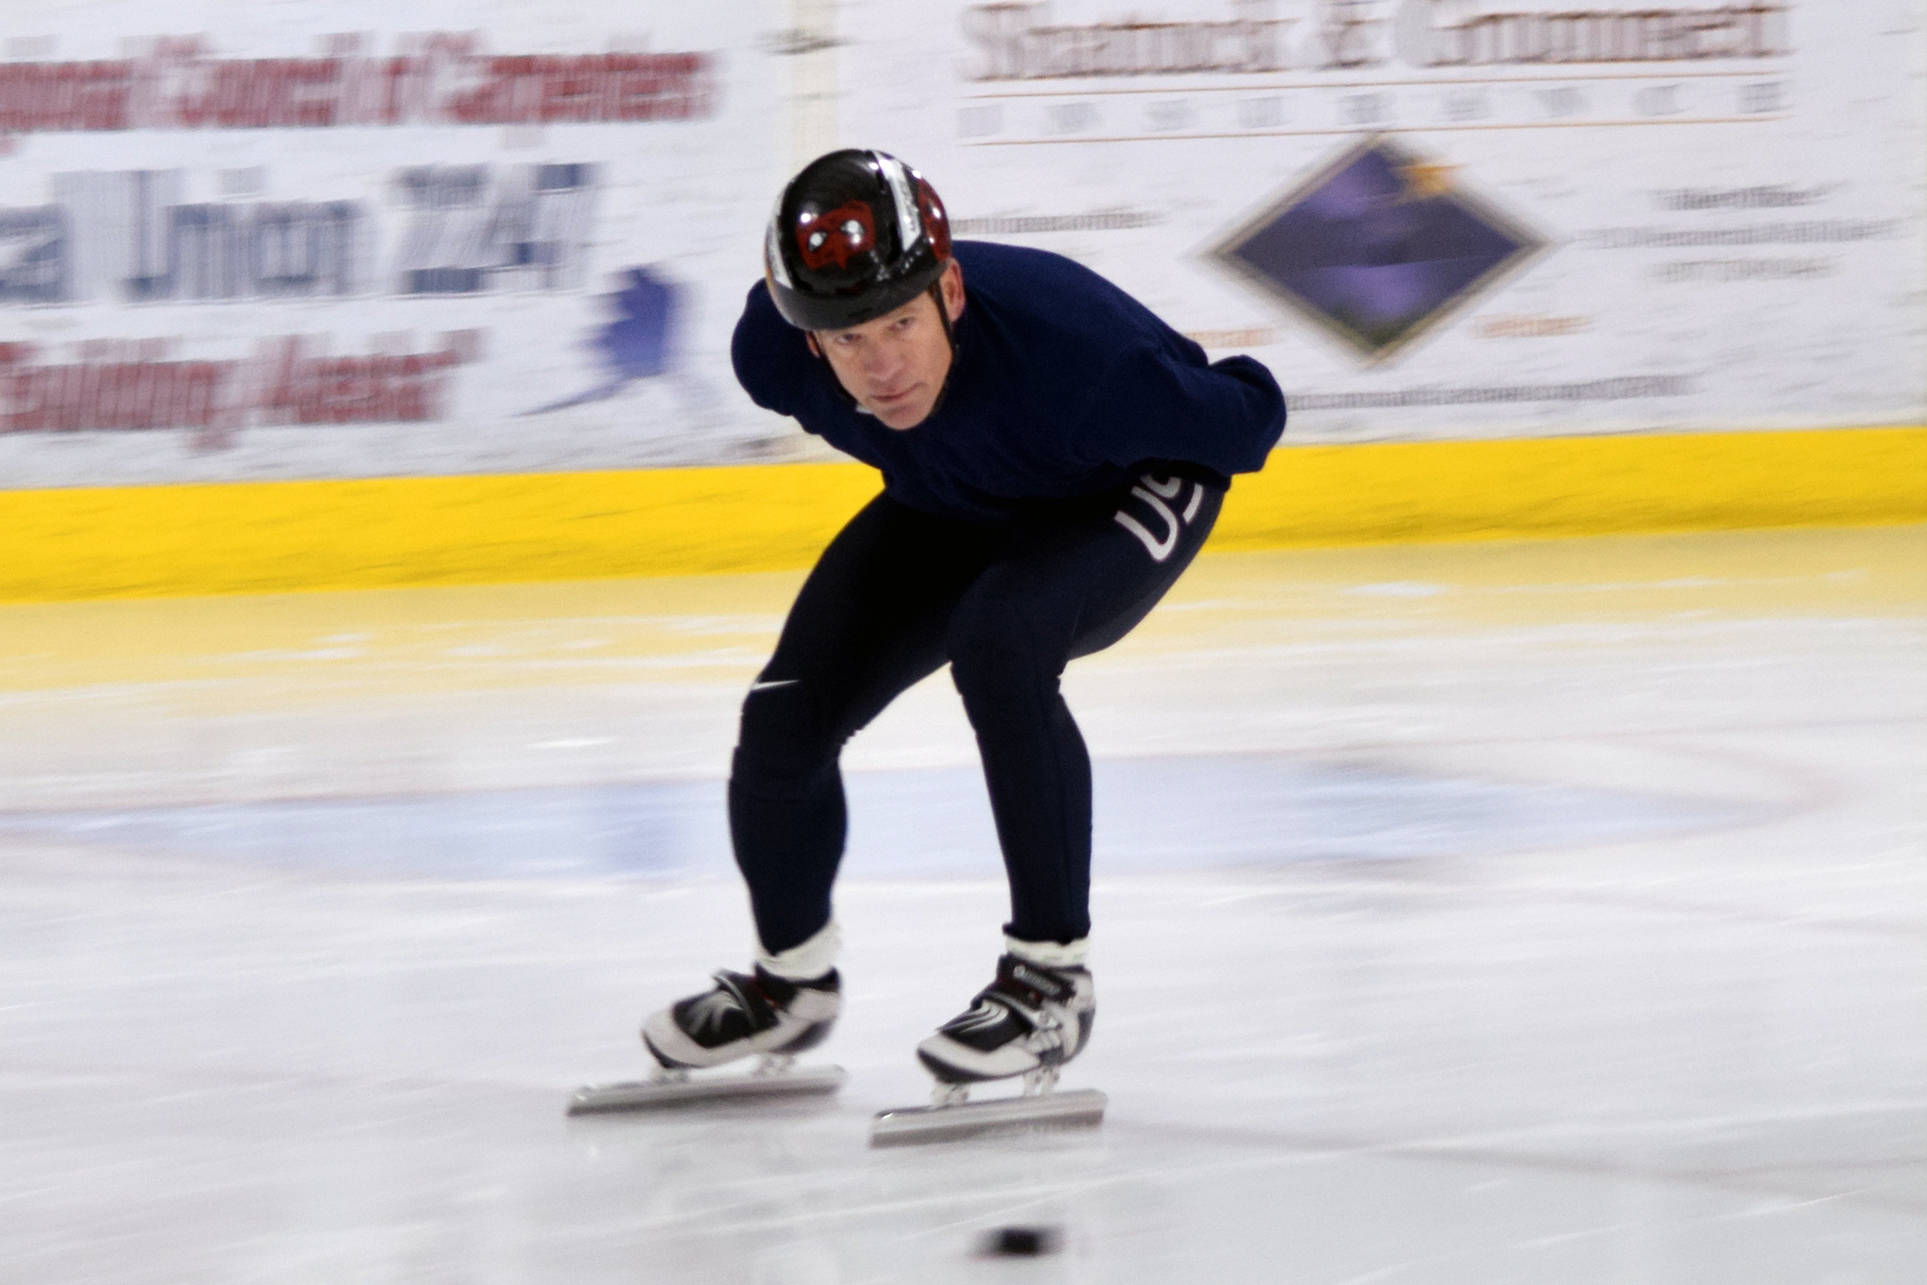 This Juneau man loves speed skating. Now he’s spreading that passion to others.